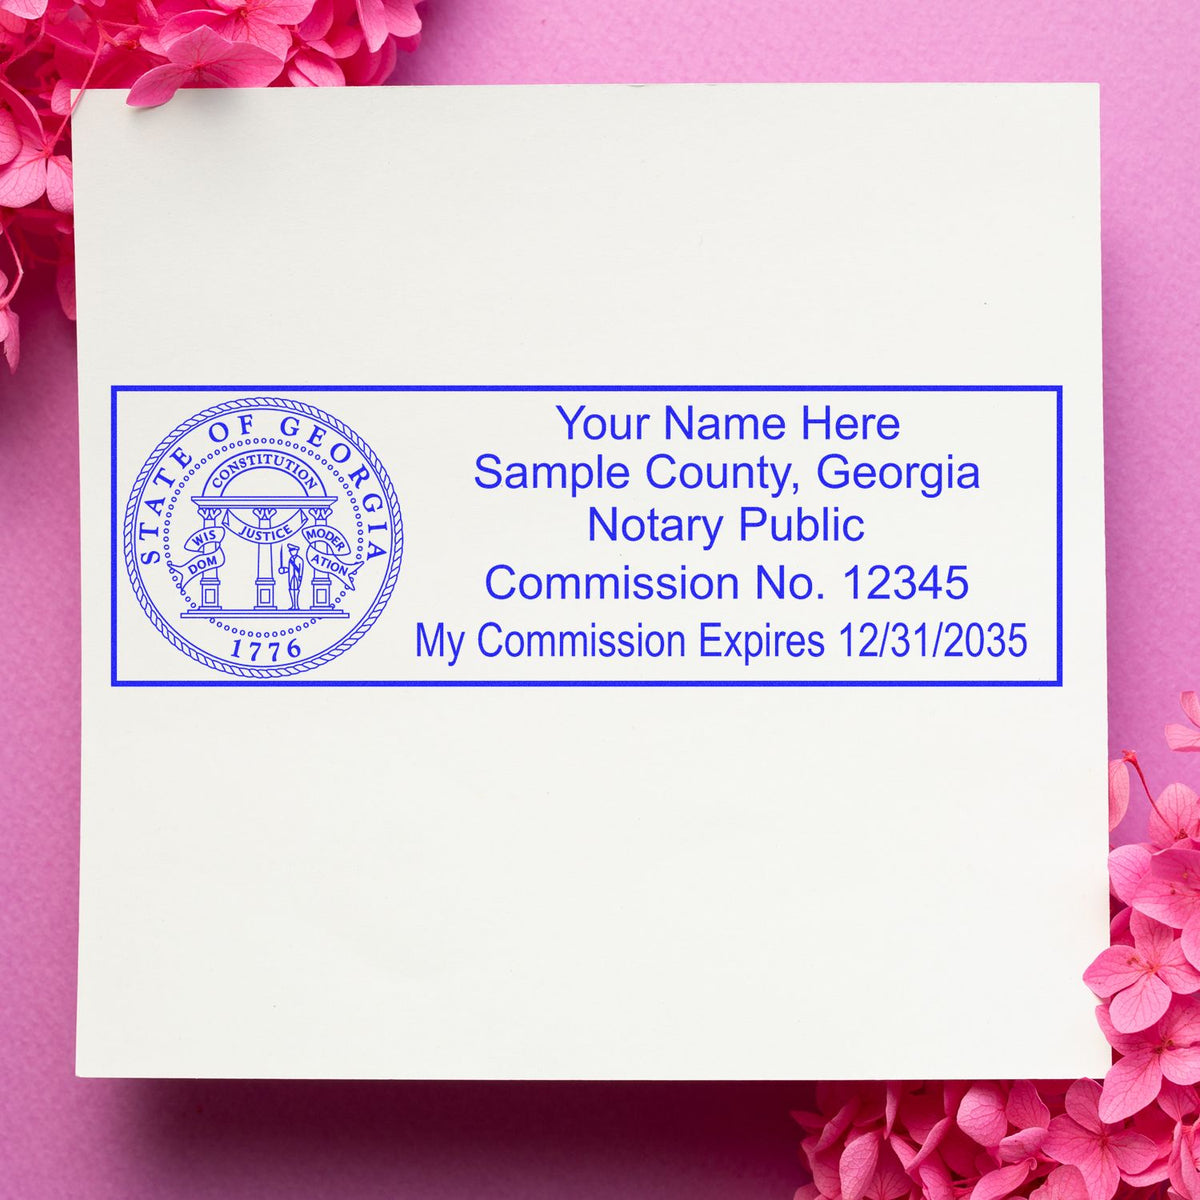 This paper is stamped with a sample imprint of the Slim Pre-Inked Rectangular Notary Stamp for Georgia, signifying its quality and reliability.